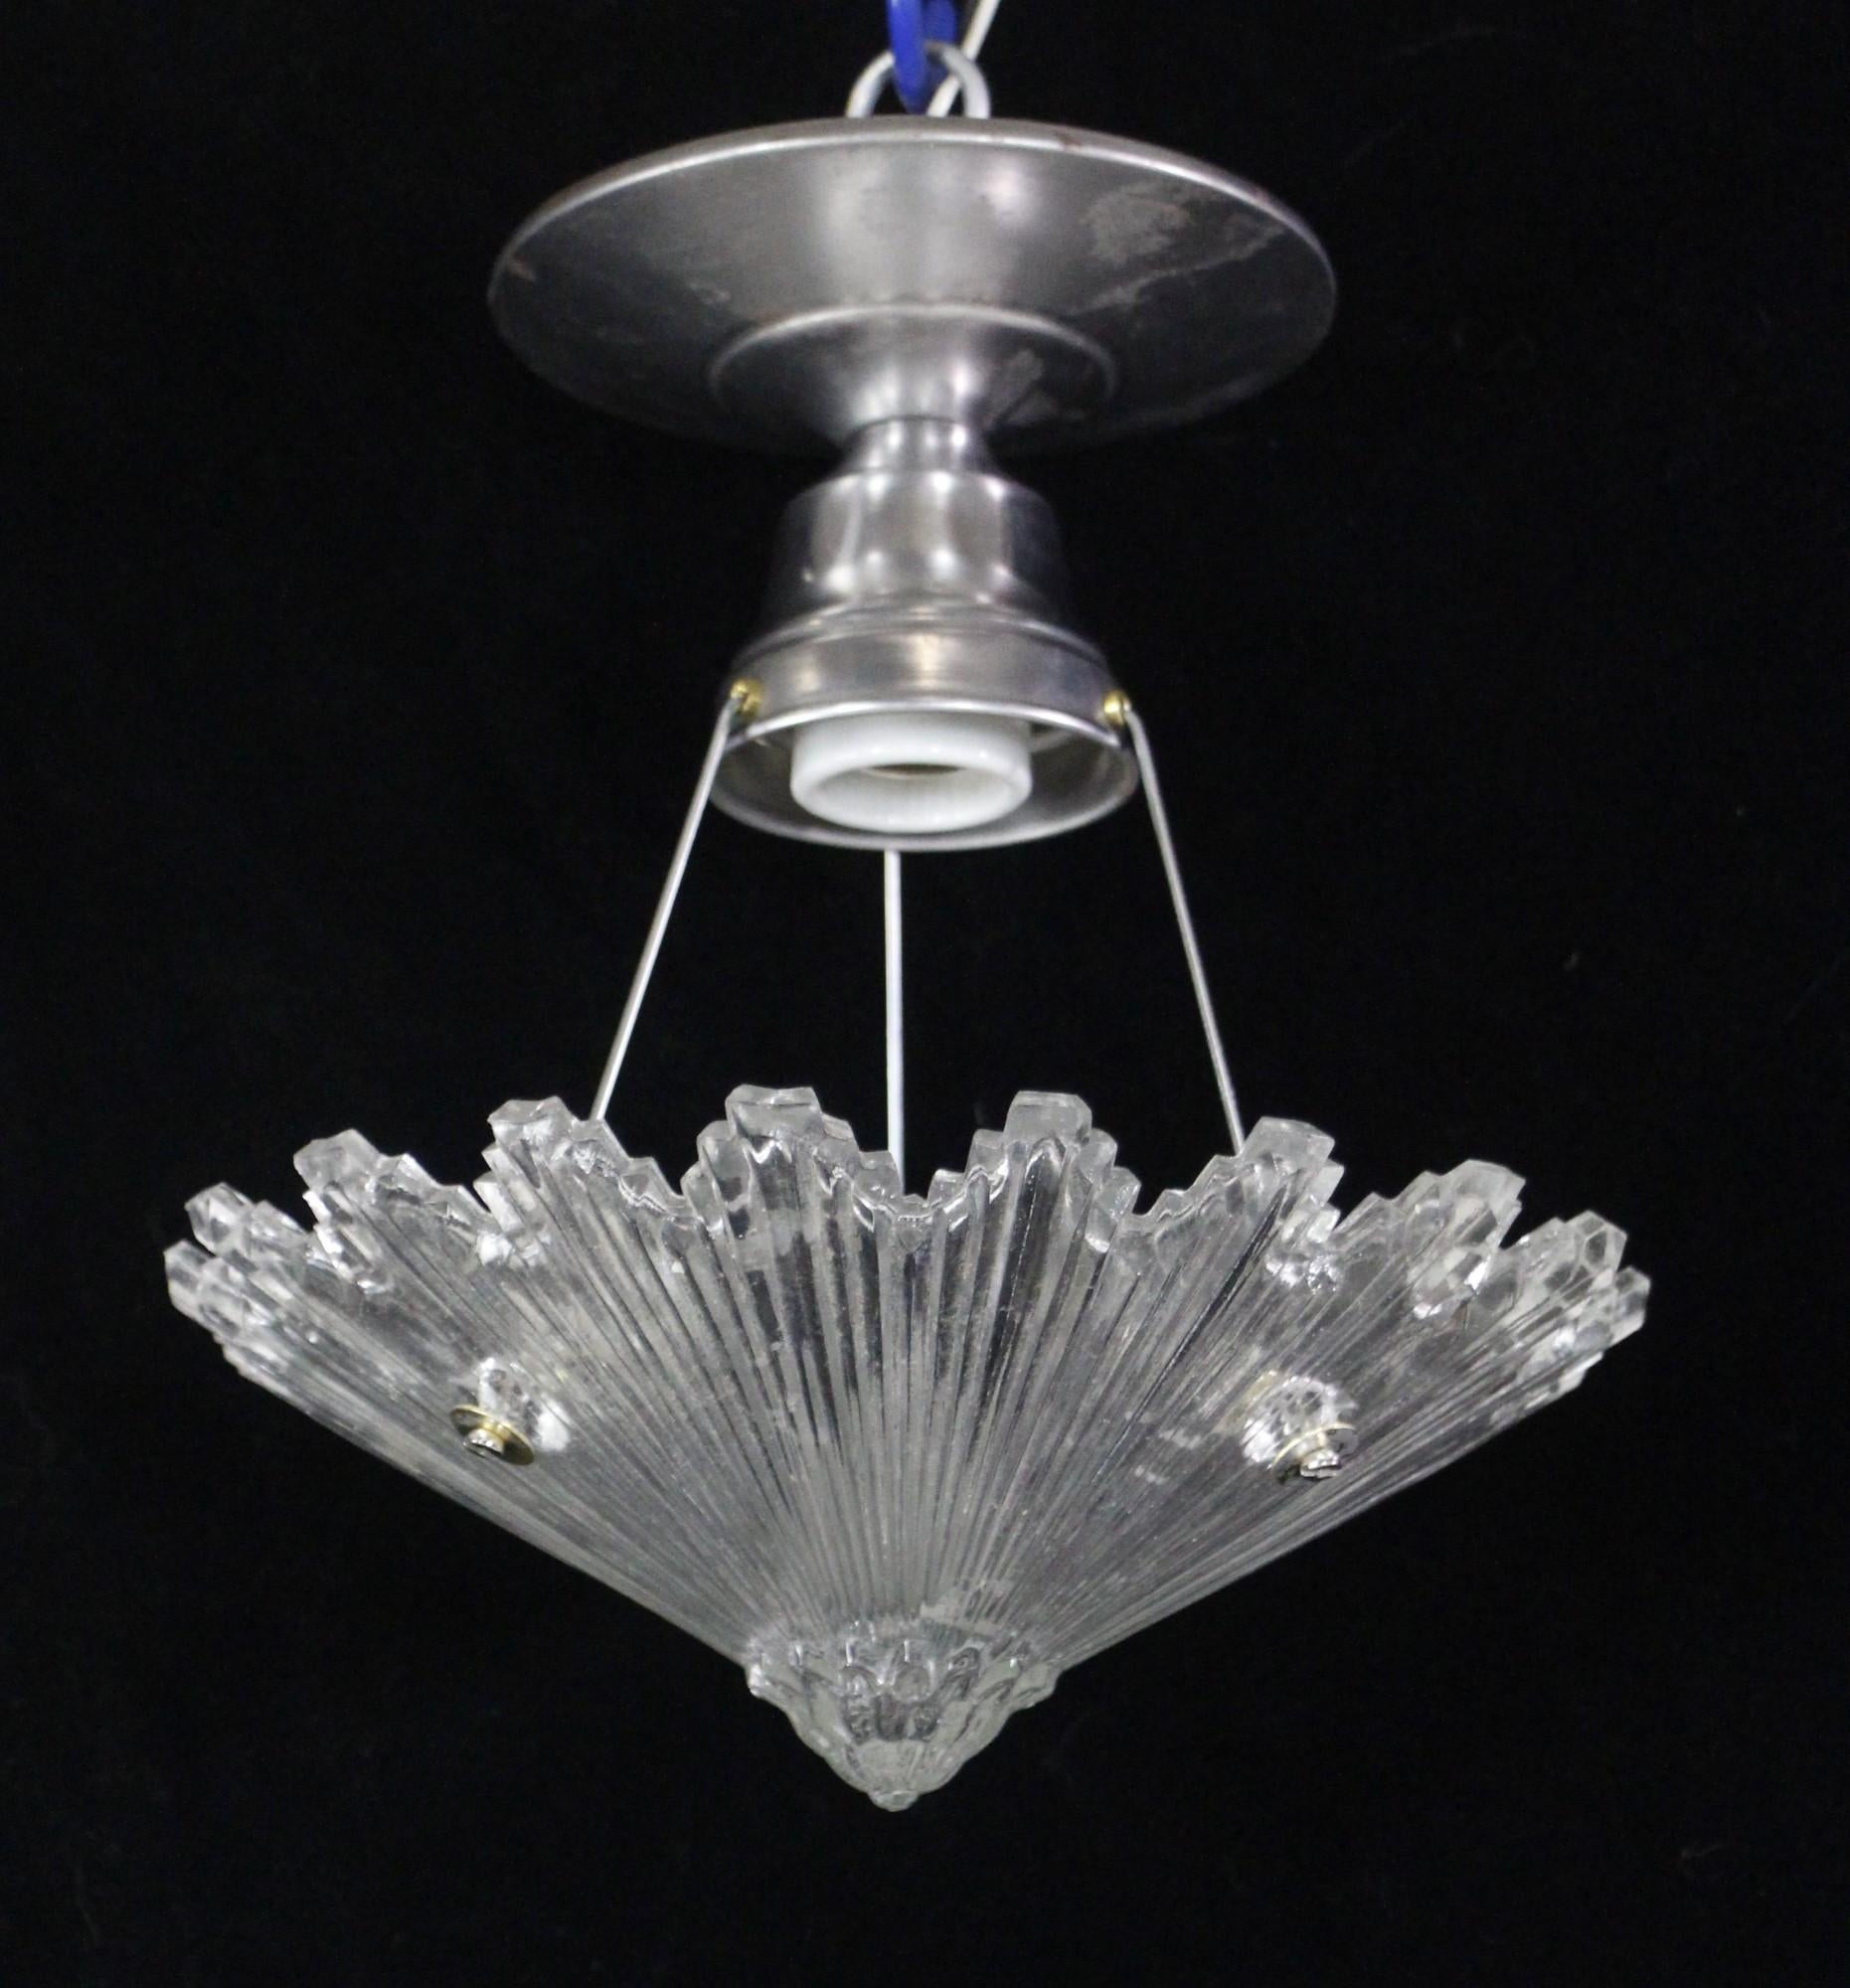 Early 20th century Art Deco style semi flush mount pendant light with a nickel plated steel fitter. Clear starburst design shade. Takes one E26 light bulb. 